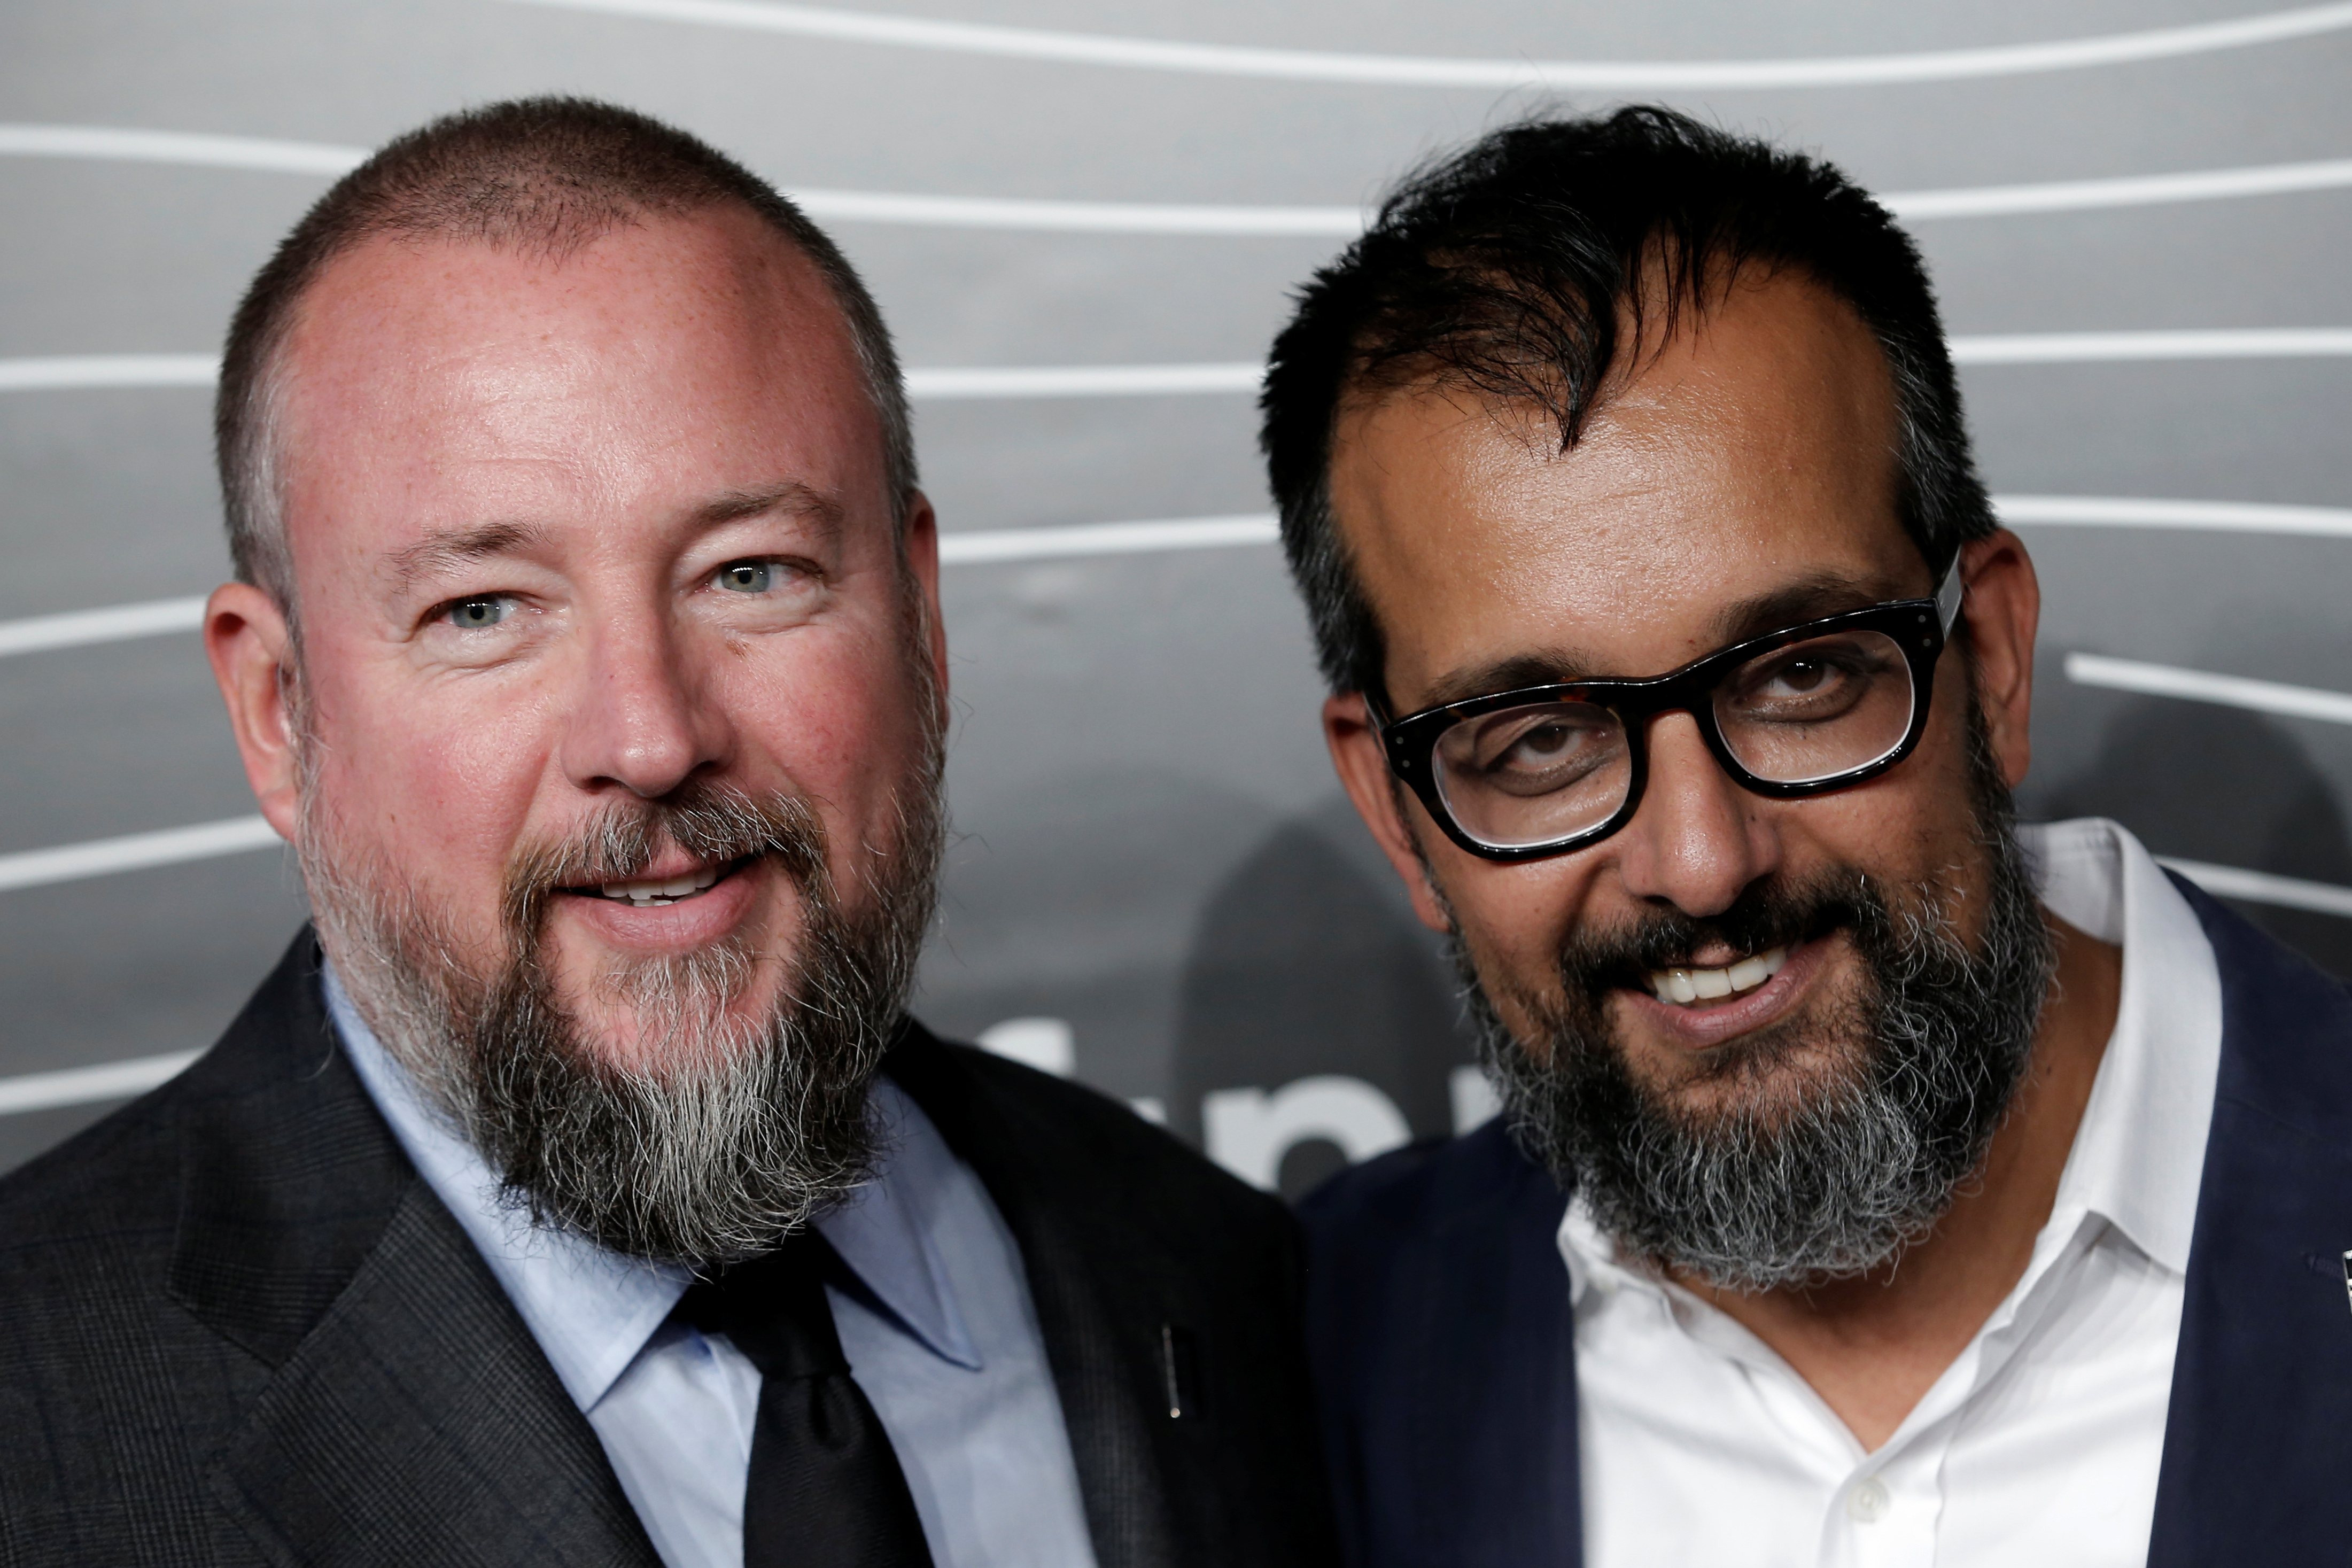 VICE co-founders Shane Smith and Suroosh Alvi pose as they arrive at the 20th Annual Webby Awards in Manhattan, New York